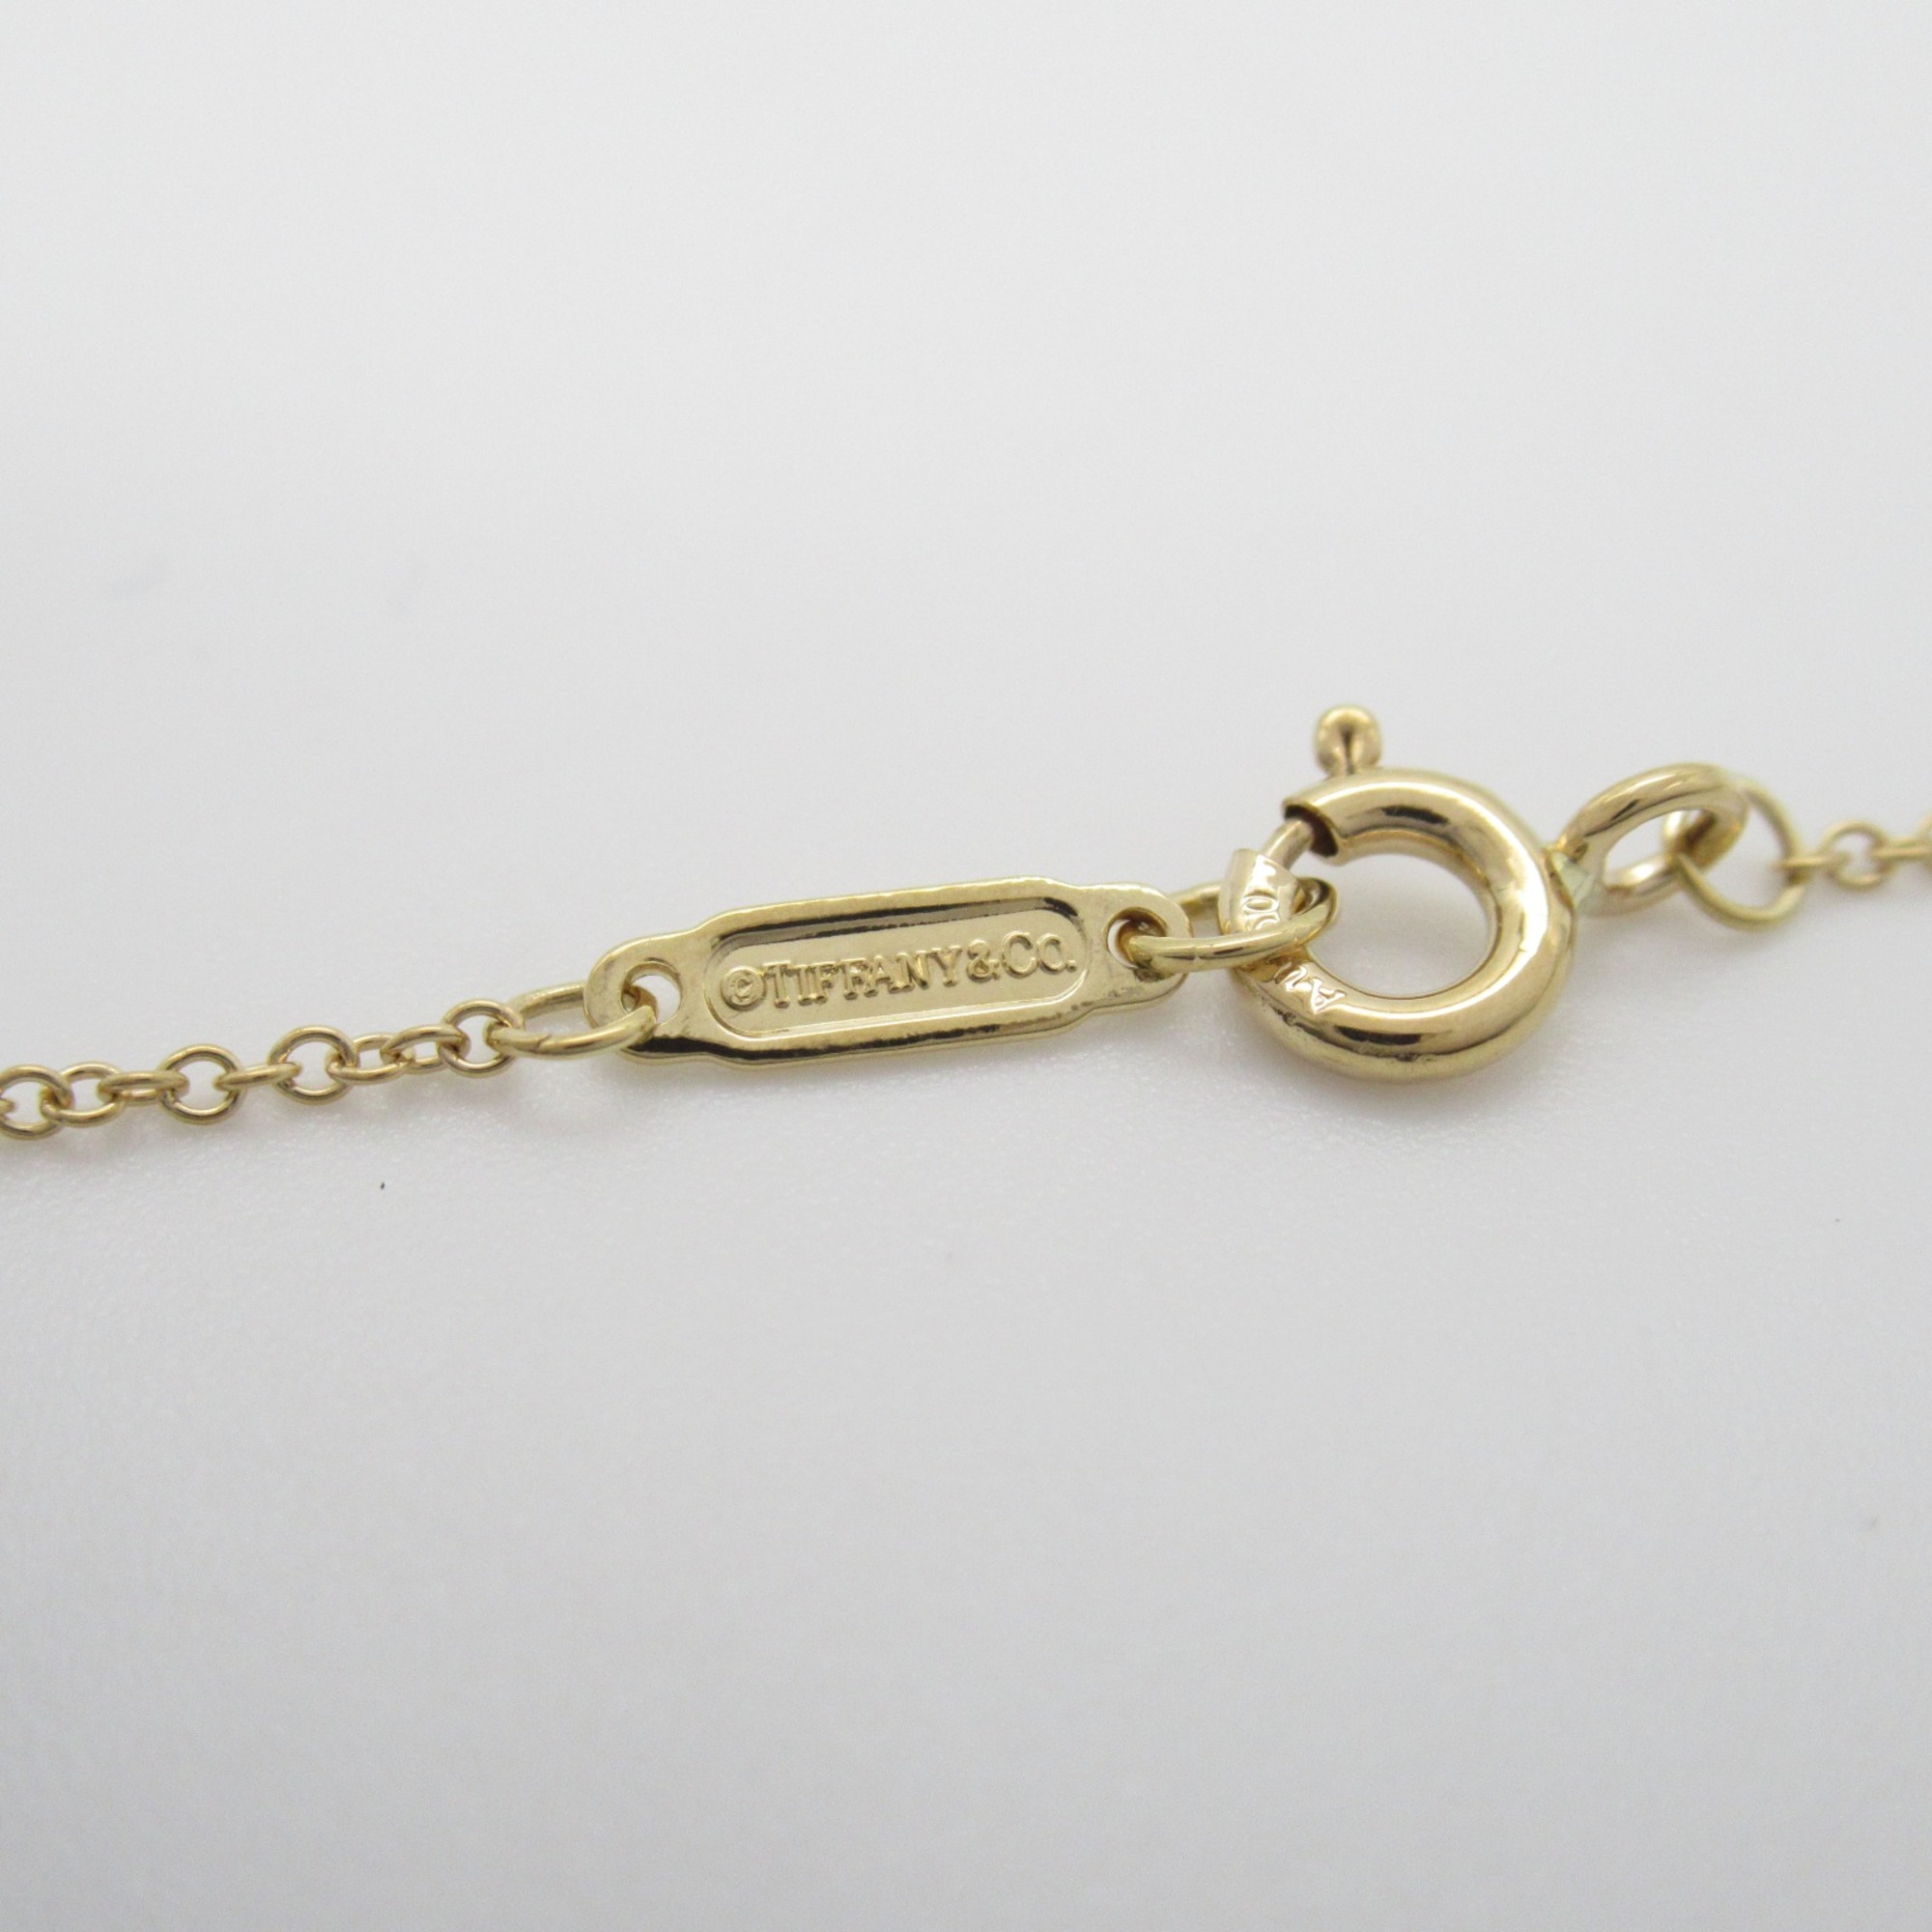 TIFFANY&CO Fleur-de-Lys Keybar Necklace Necklace Clear  K18 (Yellow Gold) Clear